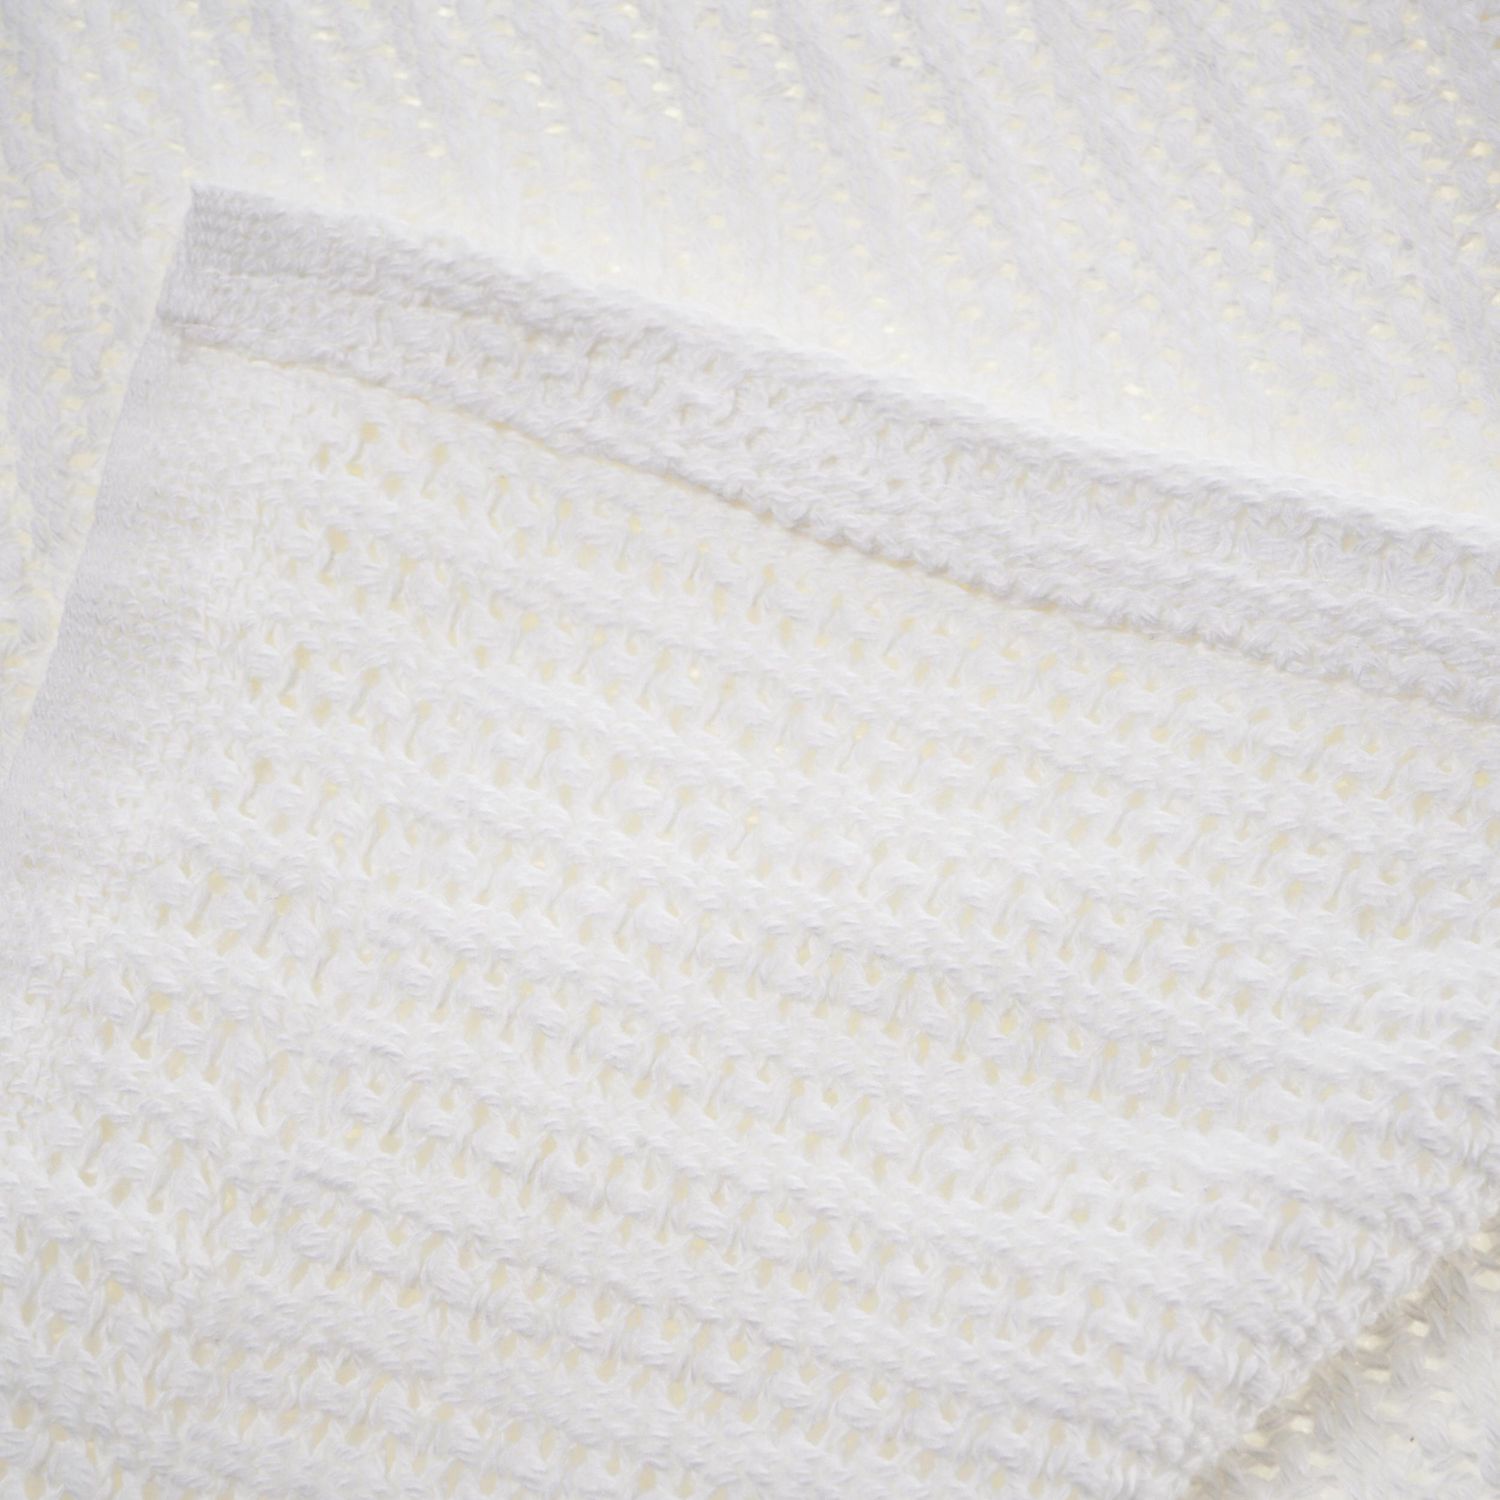 100% Cotton High Quality (1.5kg/1.0kg) Thermal Waffle Blanket